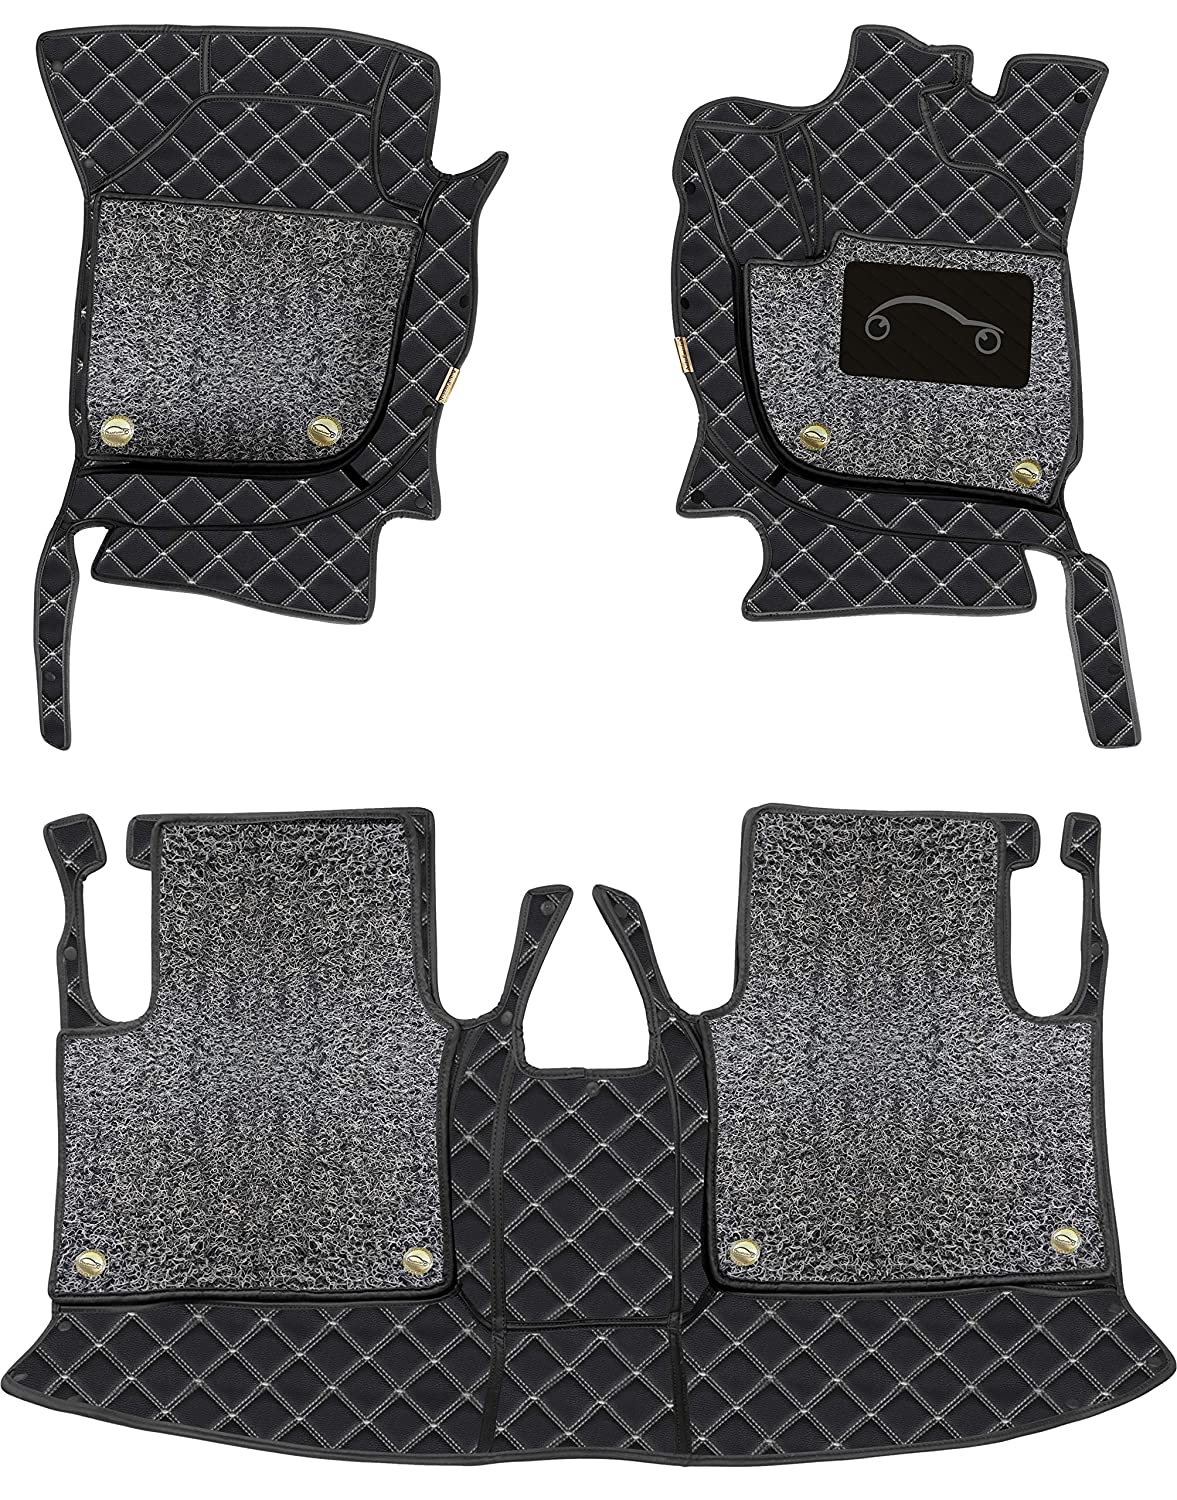 Mercedes GLS Maybach 600 4MATIC 2021 7D Luxury Car Mat, All Weather Proof, Anti-Skid, 100% Waterproof & Odorless with Unique Diamond Fish Design (24mm Luxury PU Leather, 2 Rows)